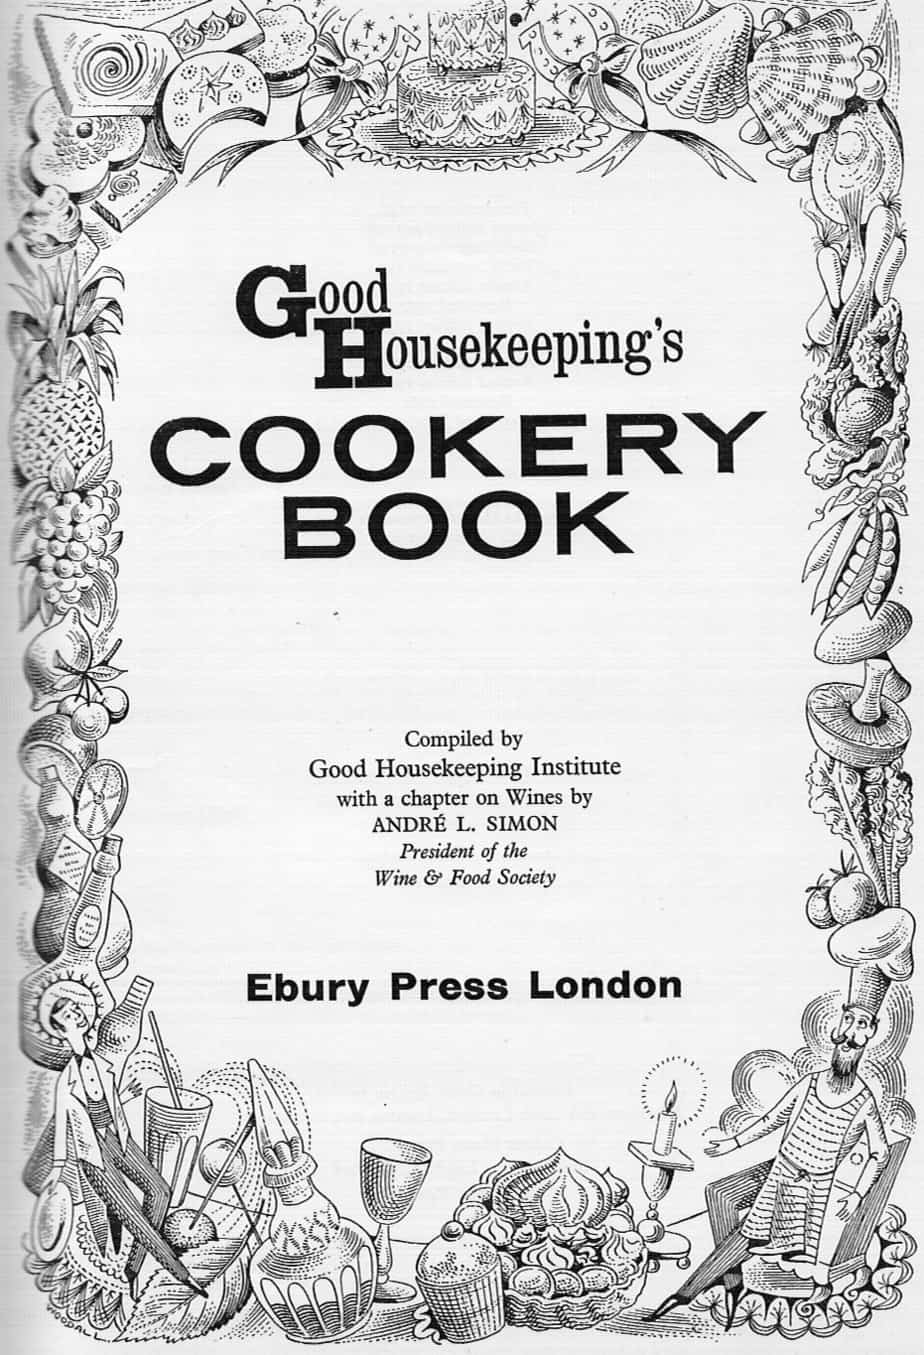 Good Housekeeping's Cookery Book Illustrations By Fred Reeves and Douglas Woodall, Ebury Press London 1948 border